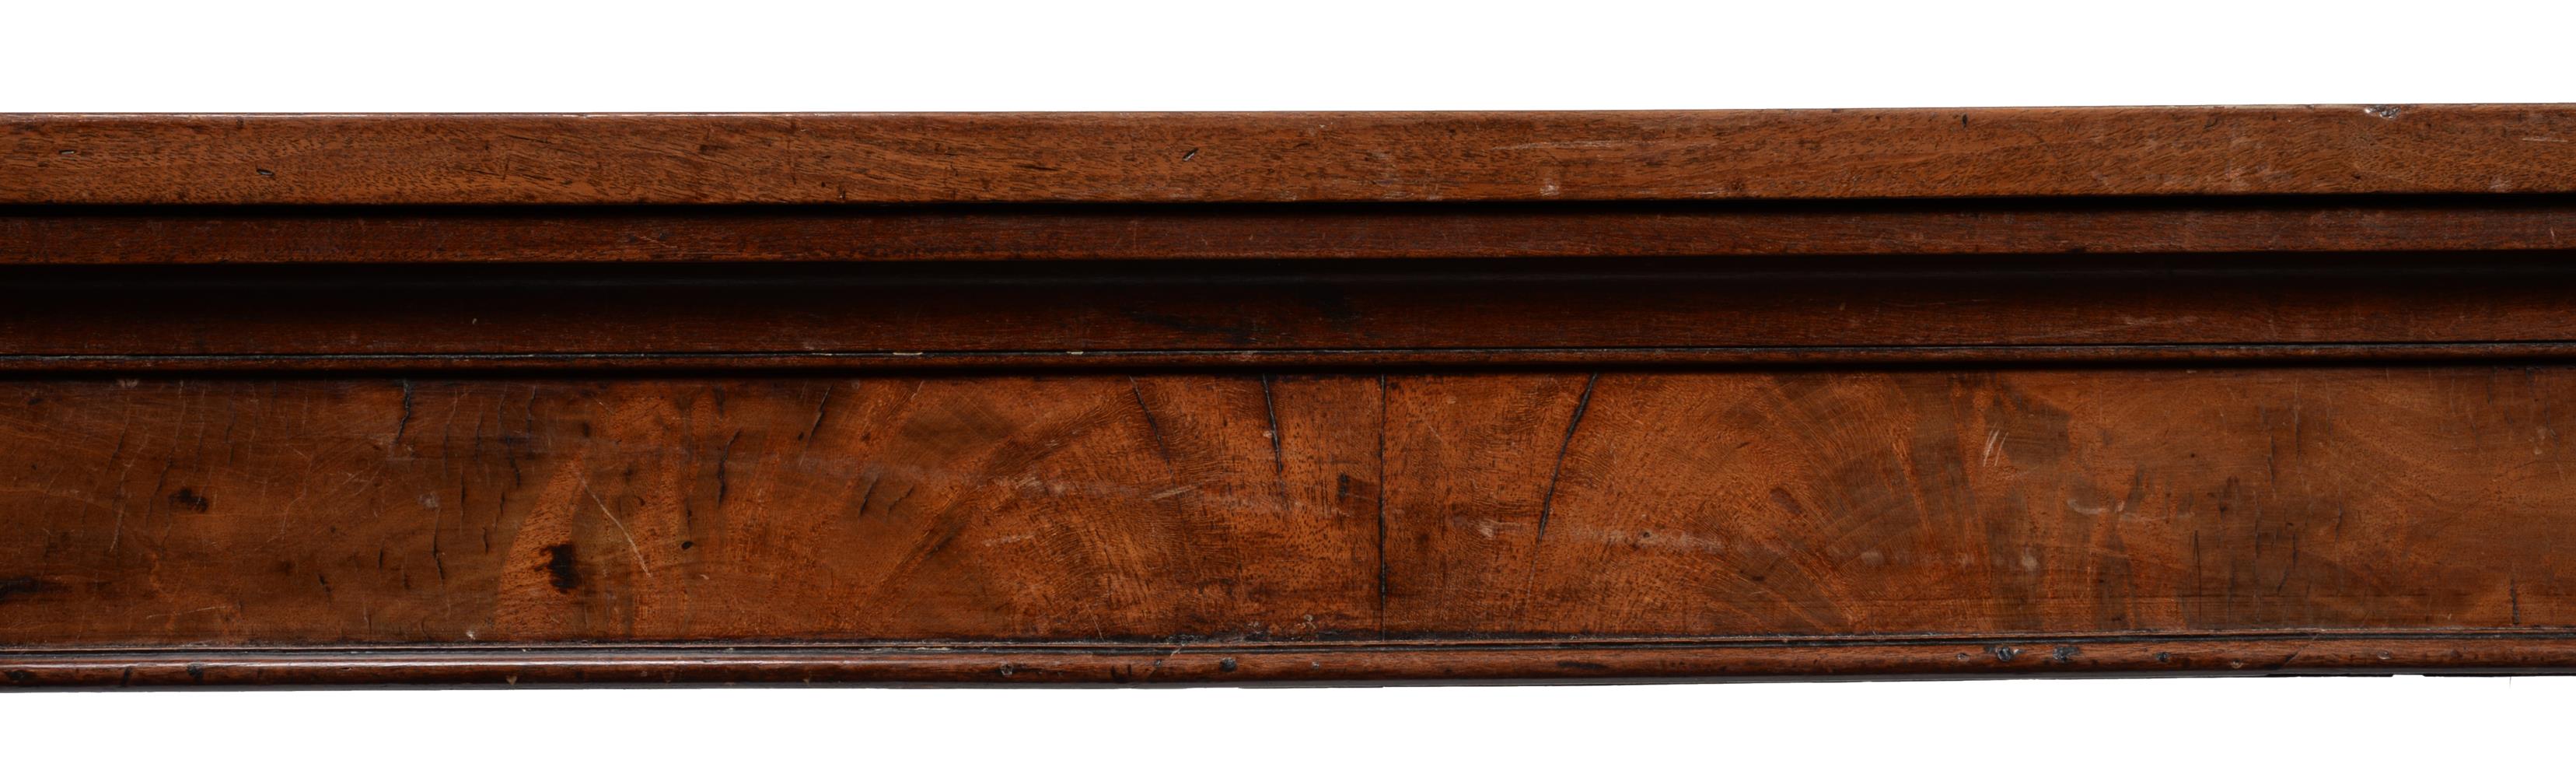 A GEORGE III MAHOGANY HALL OR SERVING TABLE, CIRCA 1790 - Image 4 of 4